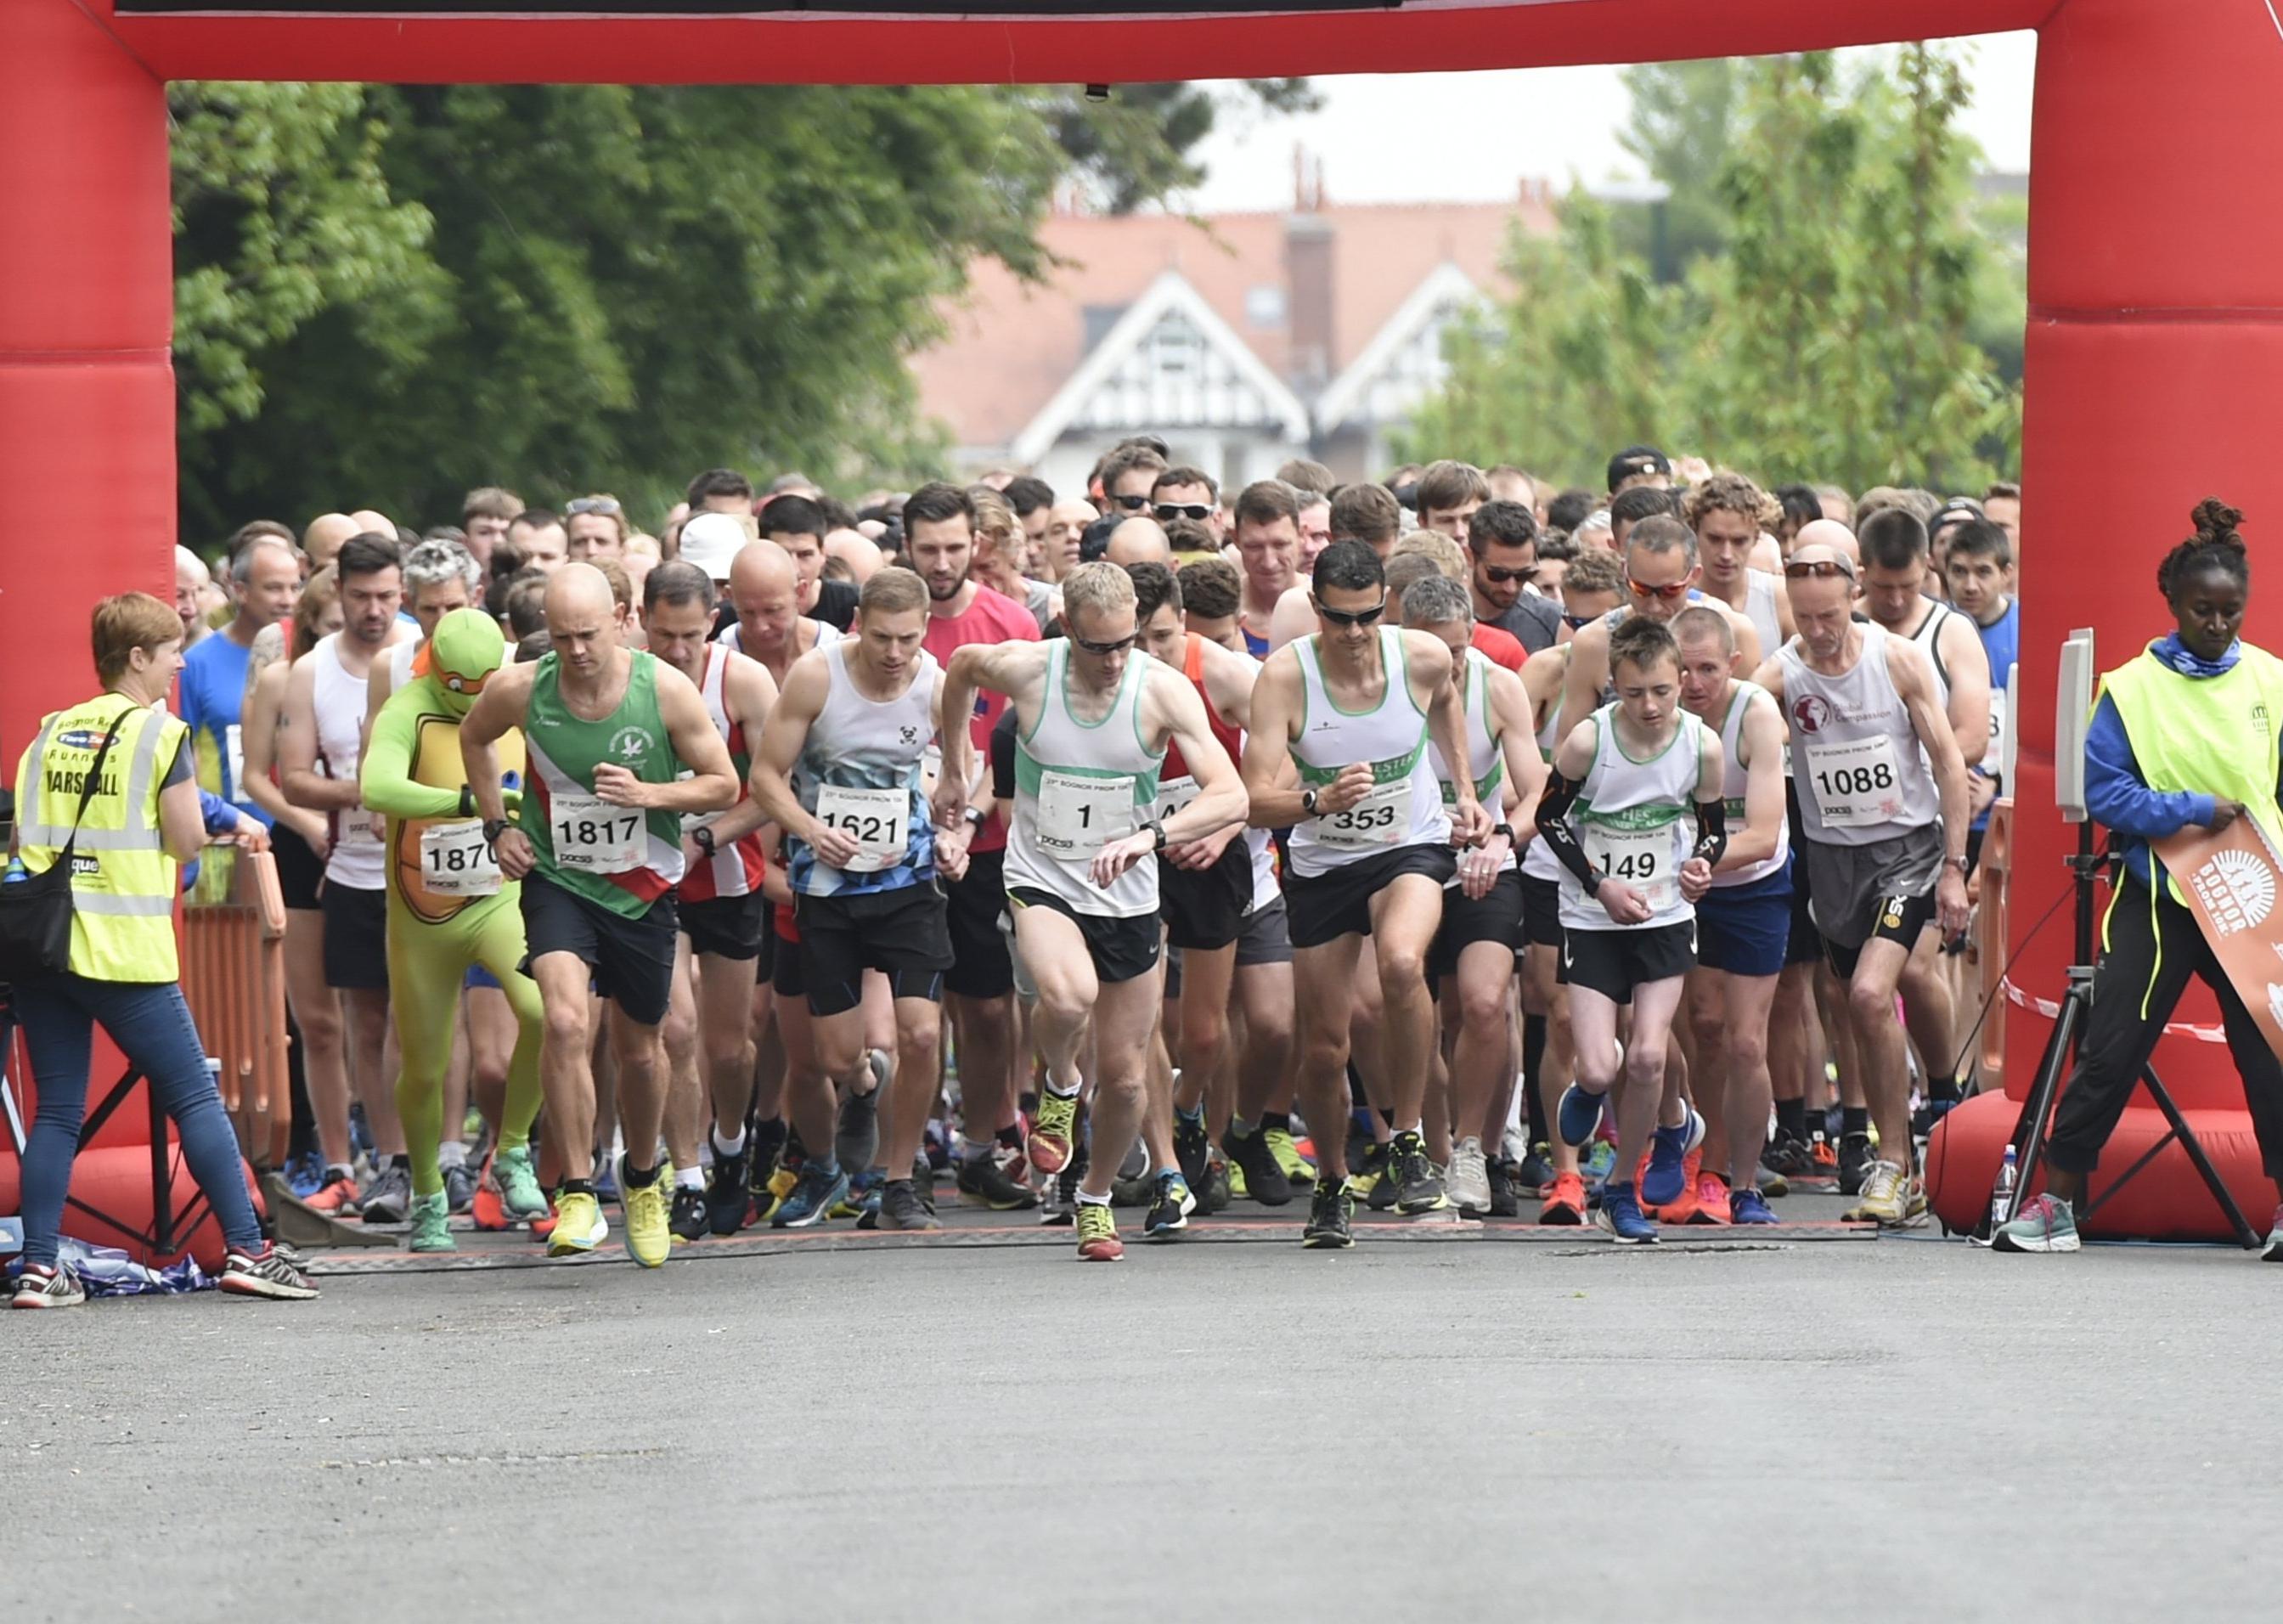 The Bognor Prom 10k takes place in May